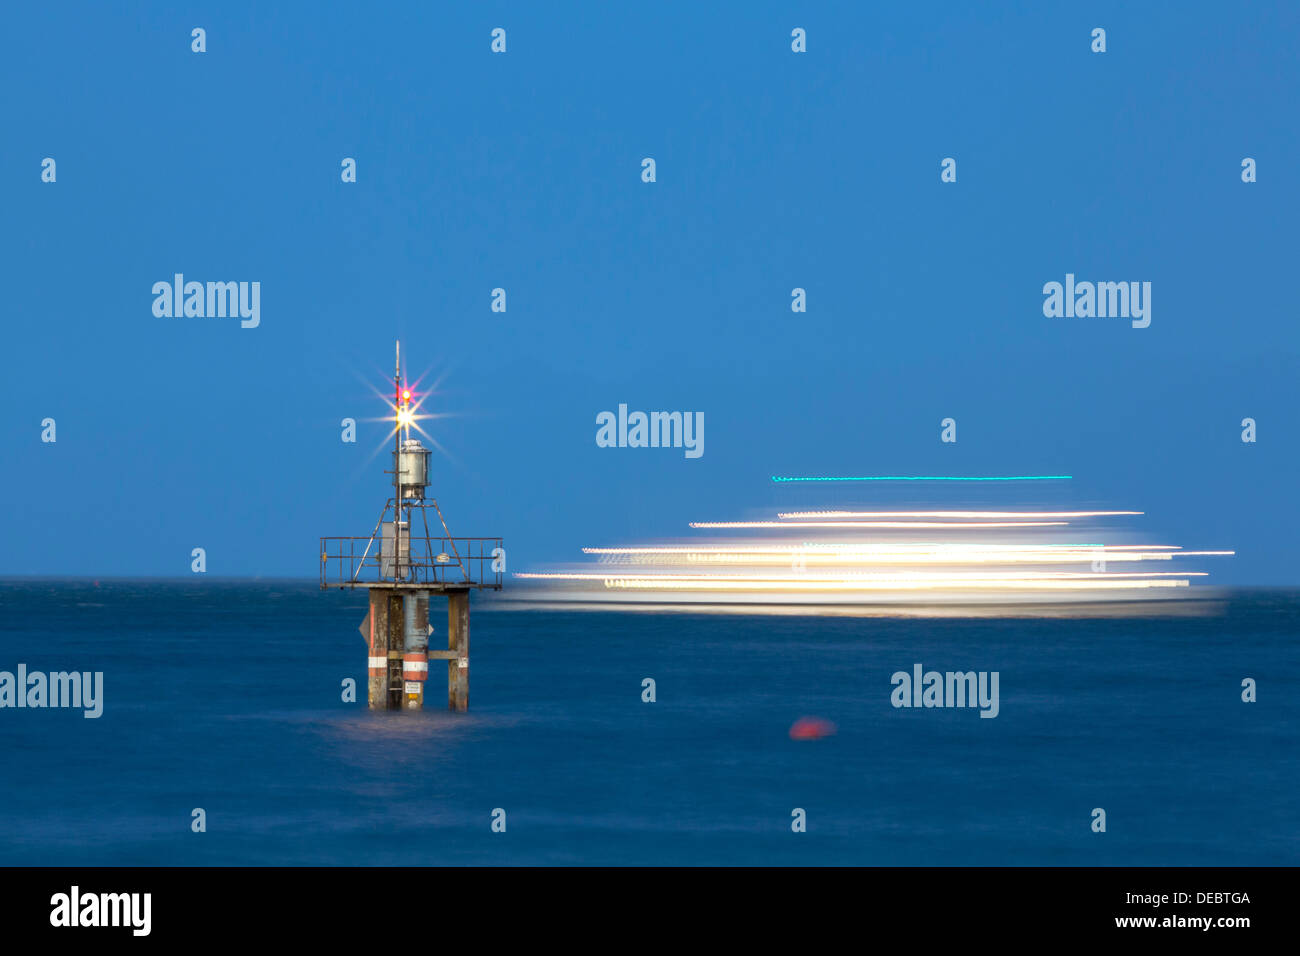 Evening mood with a with moving ship at the Hoernle Lighthouse, Lake Constance, Konstanz, Baden-Württemberg, Germany Stock Photo